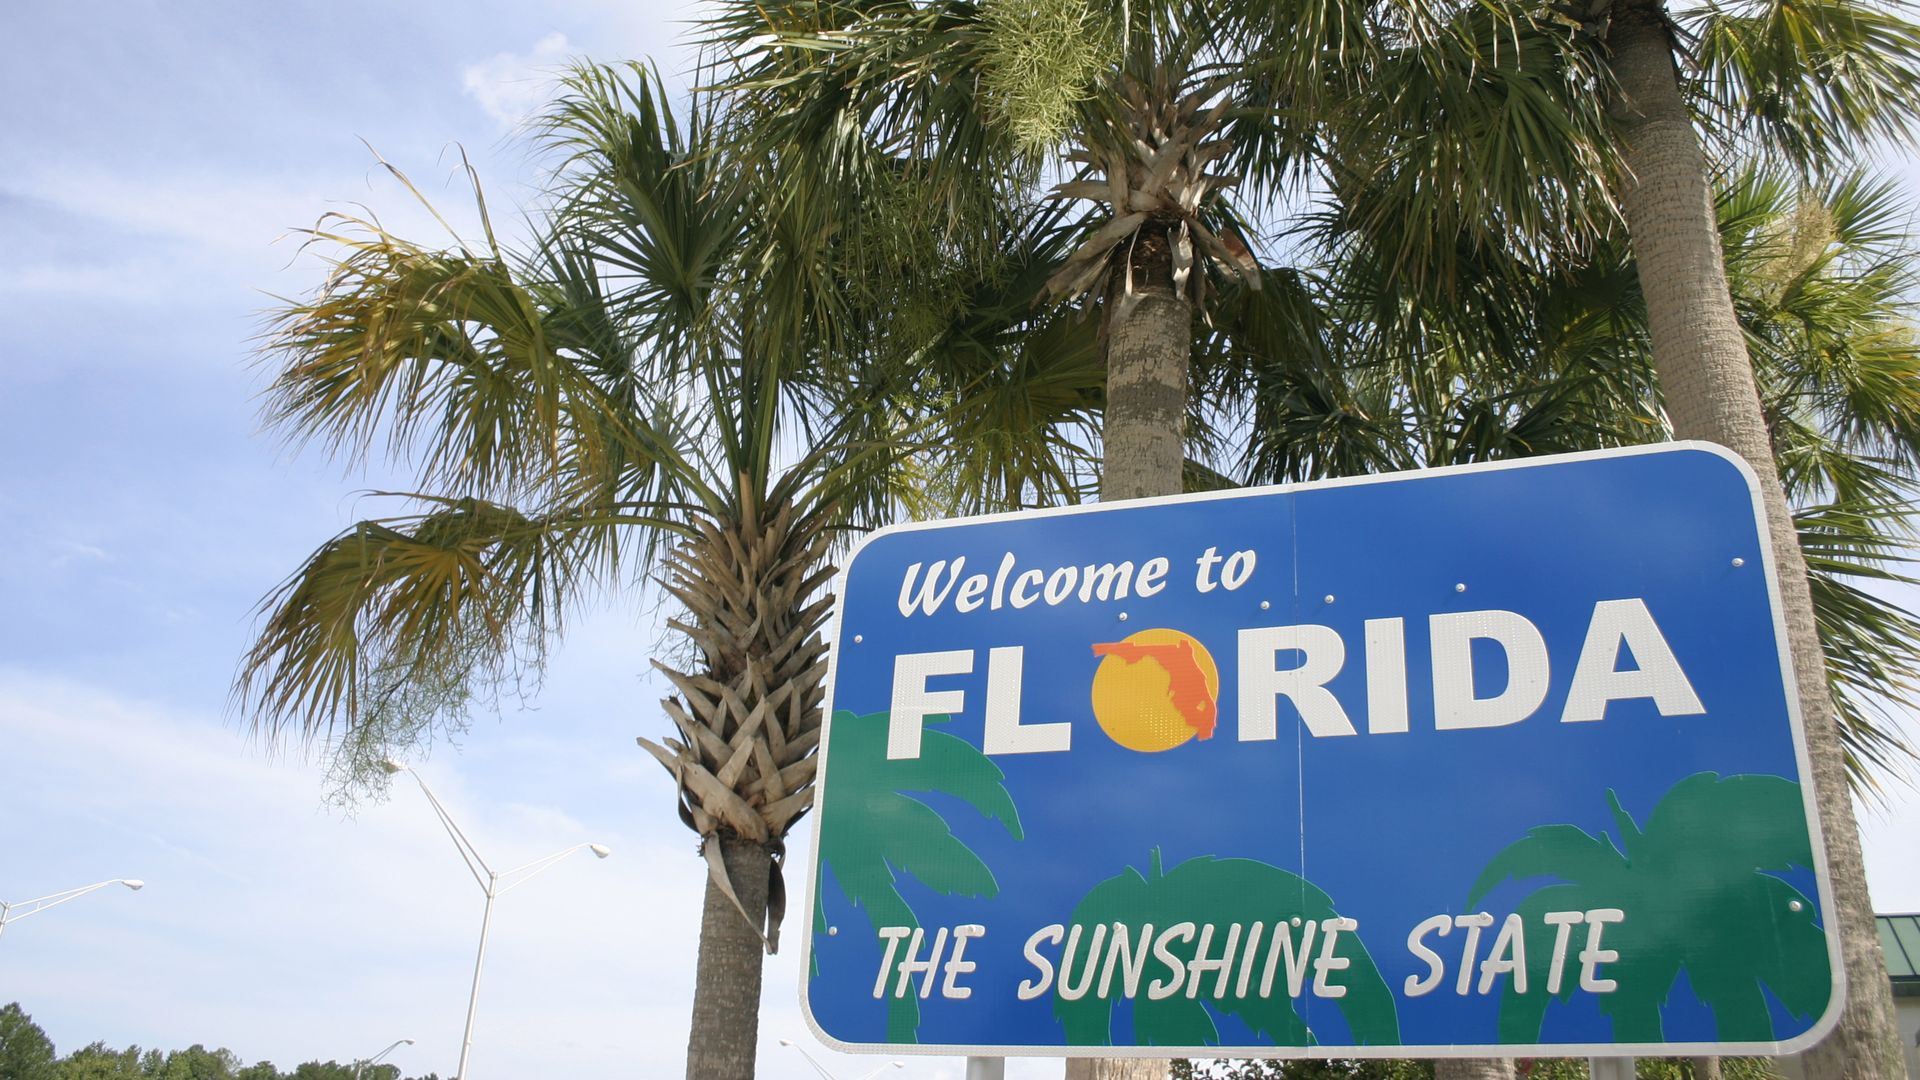 Welcome to Florida sign in front of palm trees